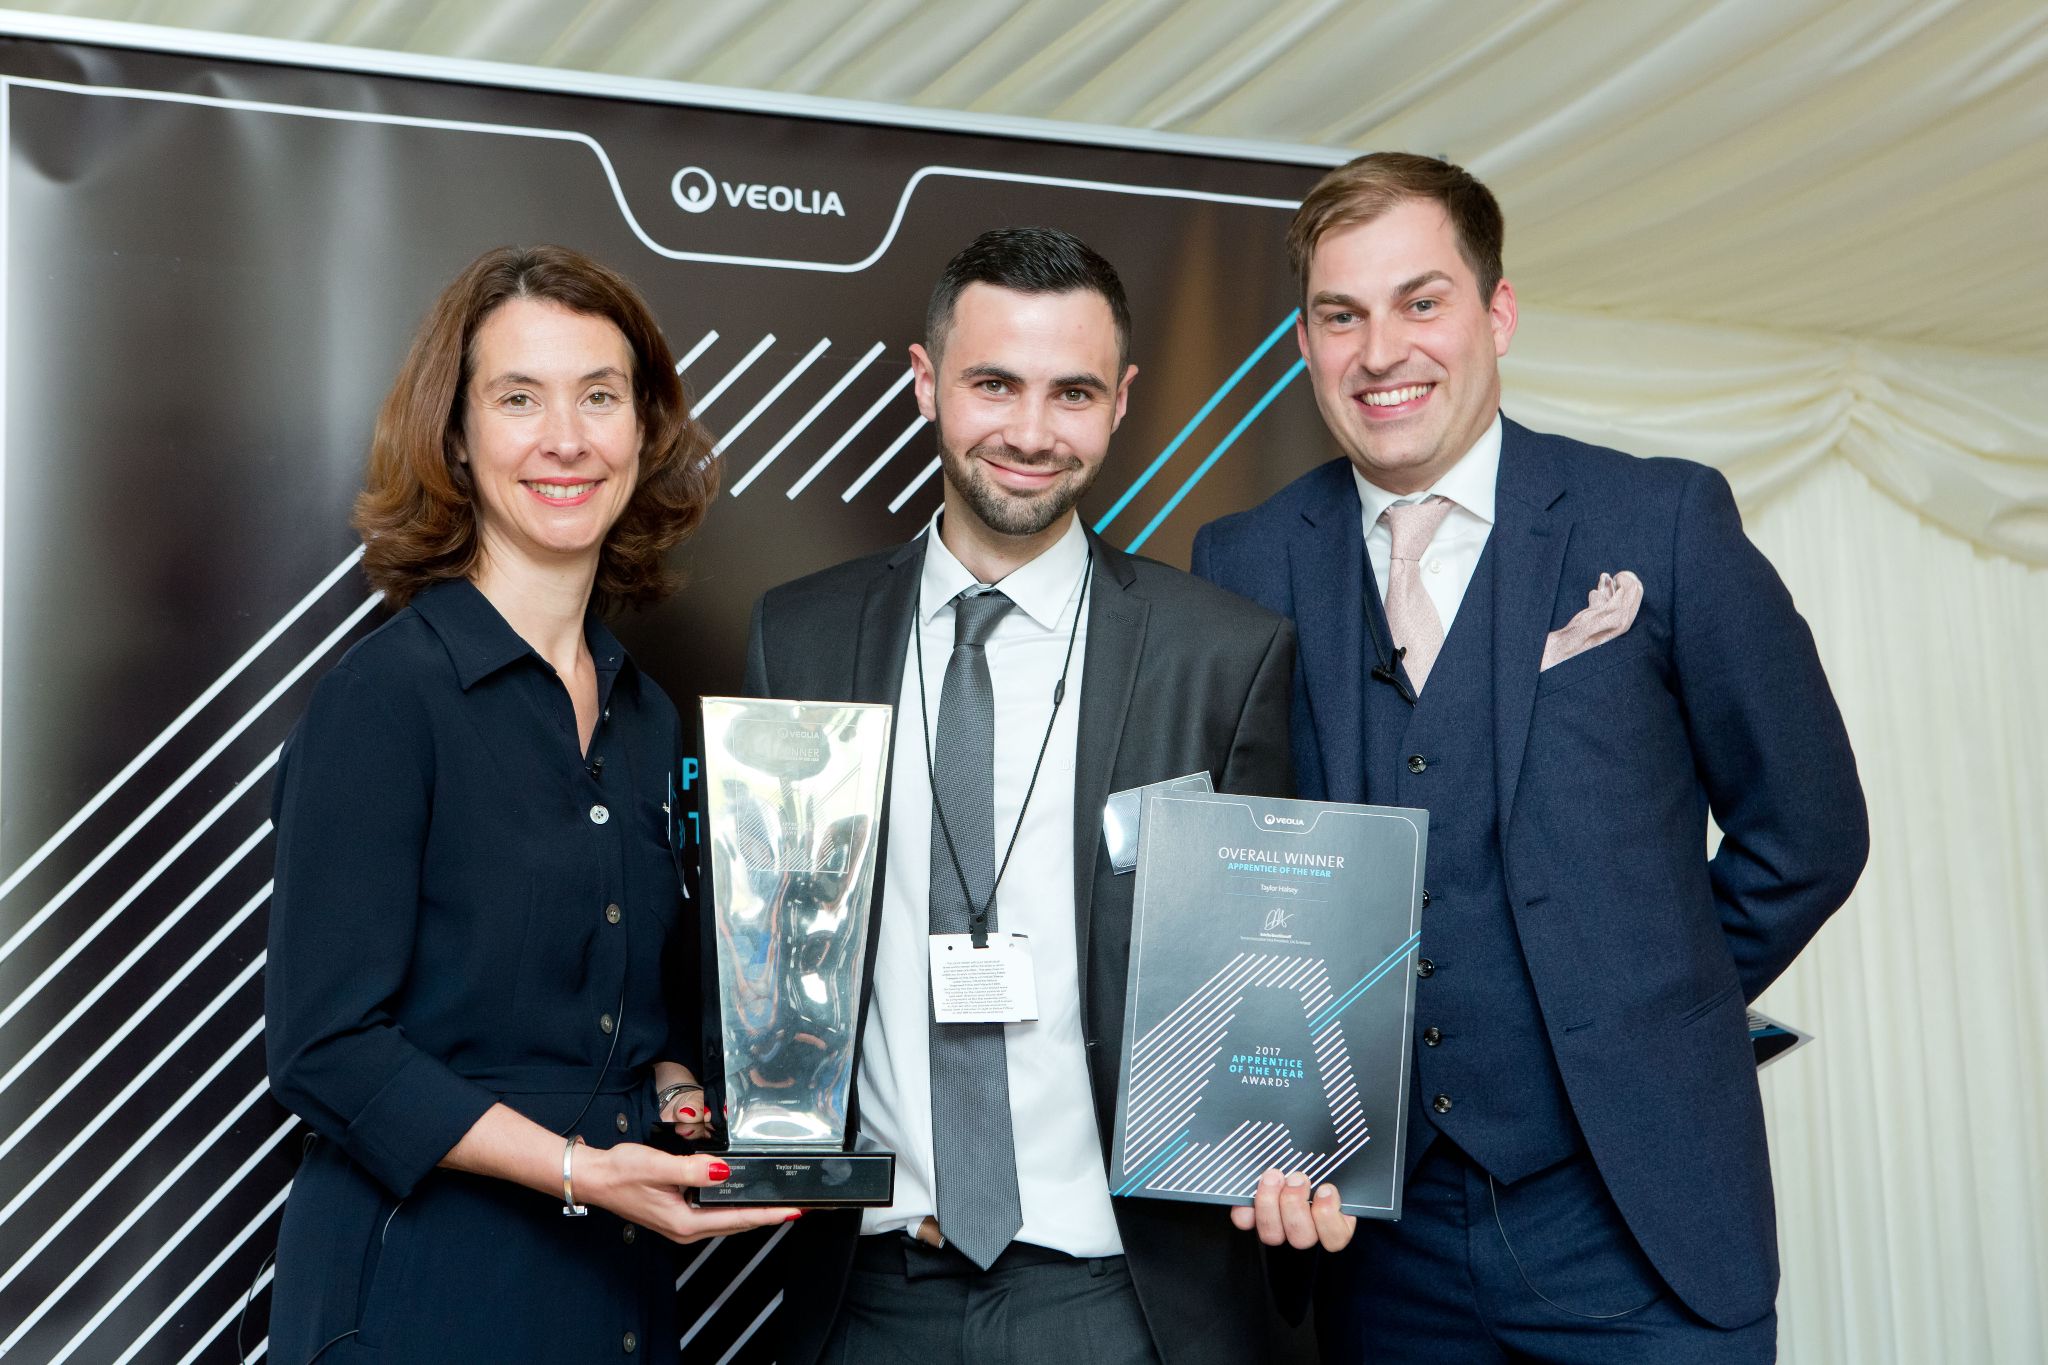 Veolia celebrates its apprentices’ success at House of Commons awards ceremony